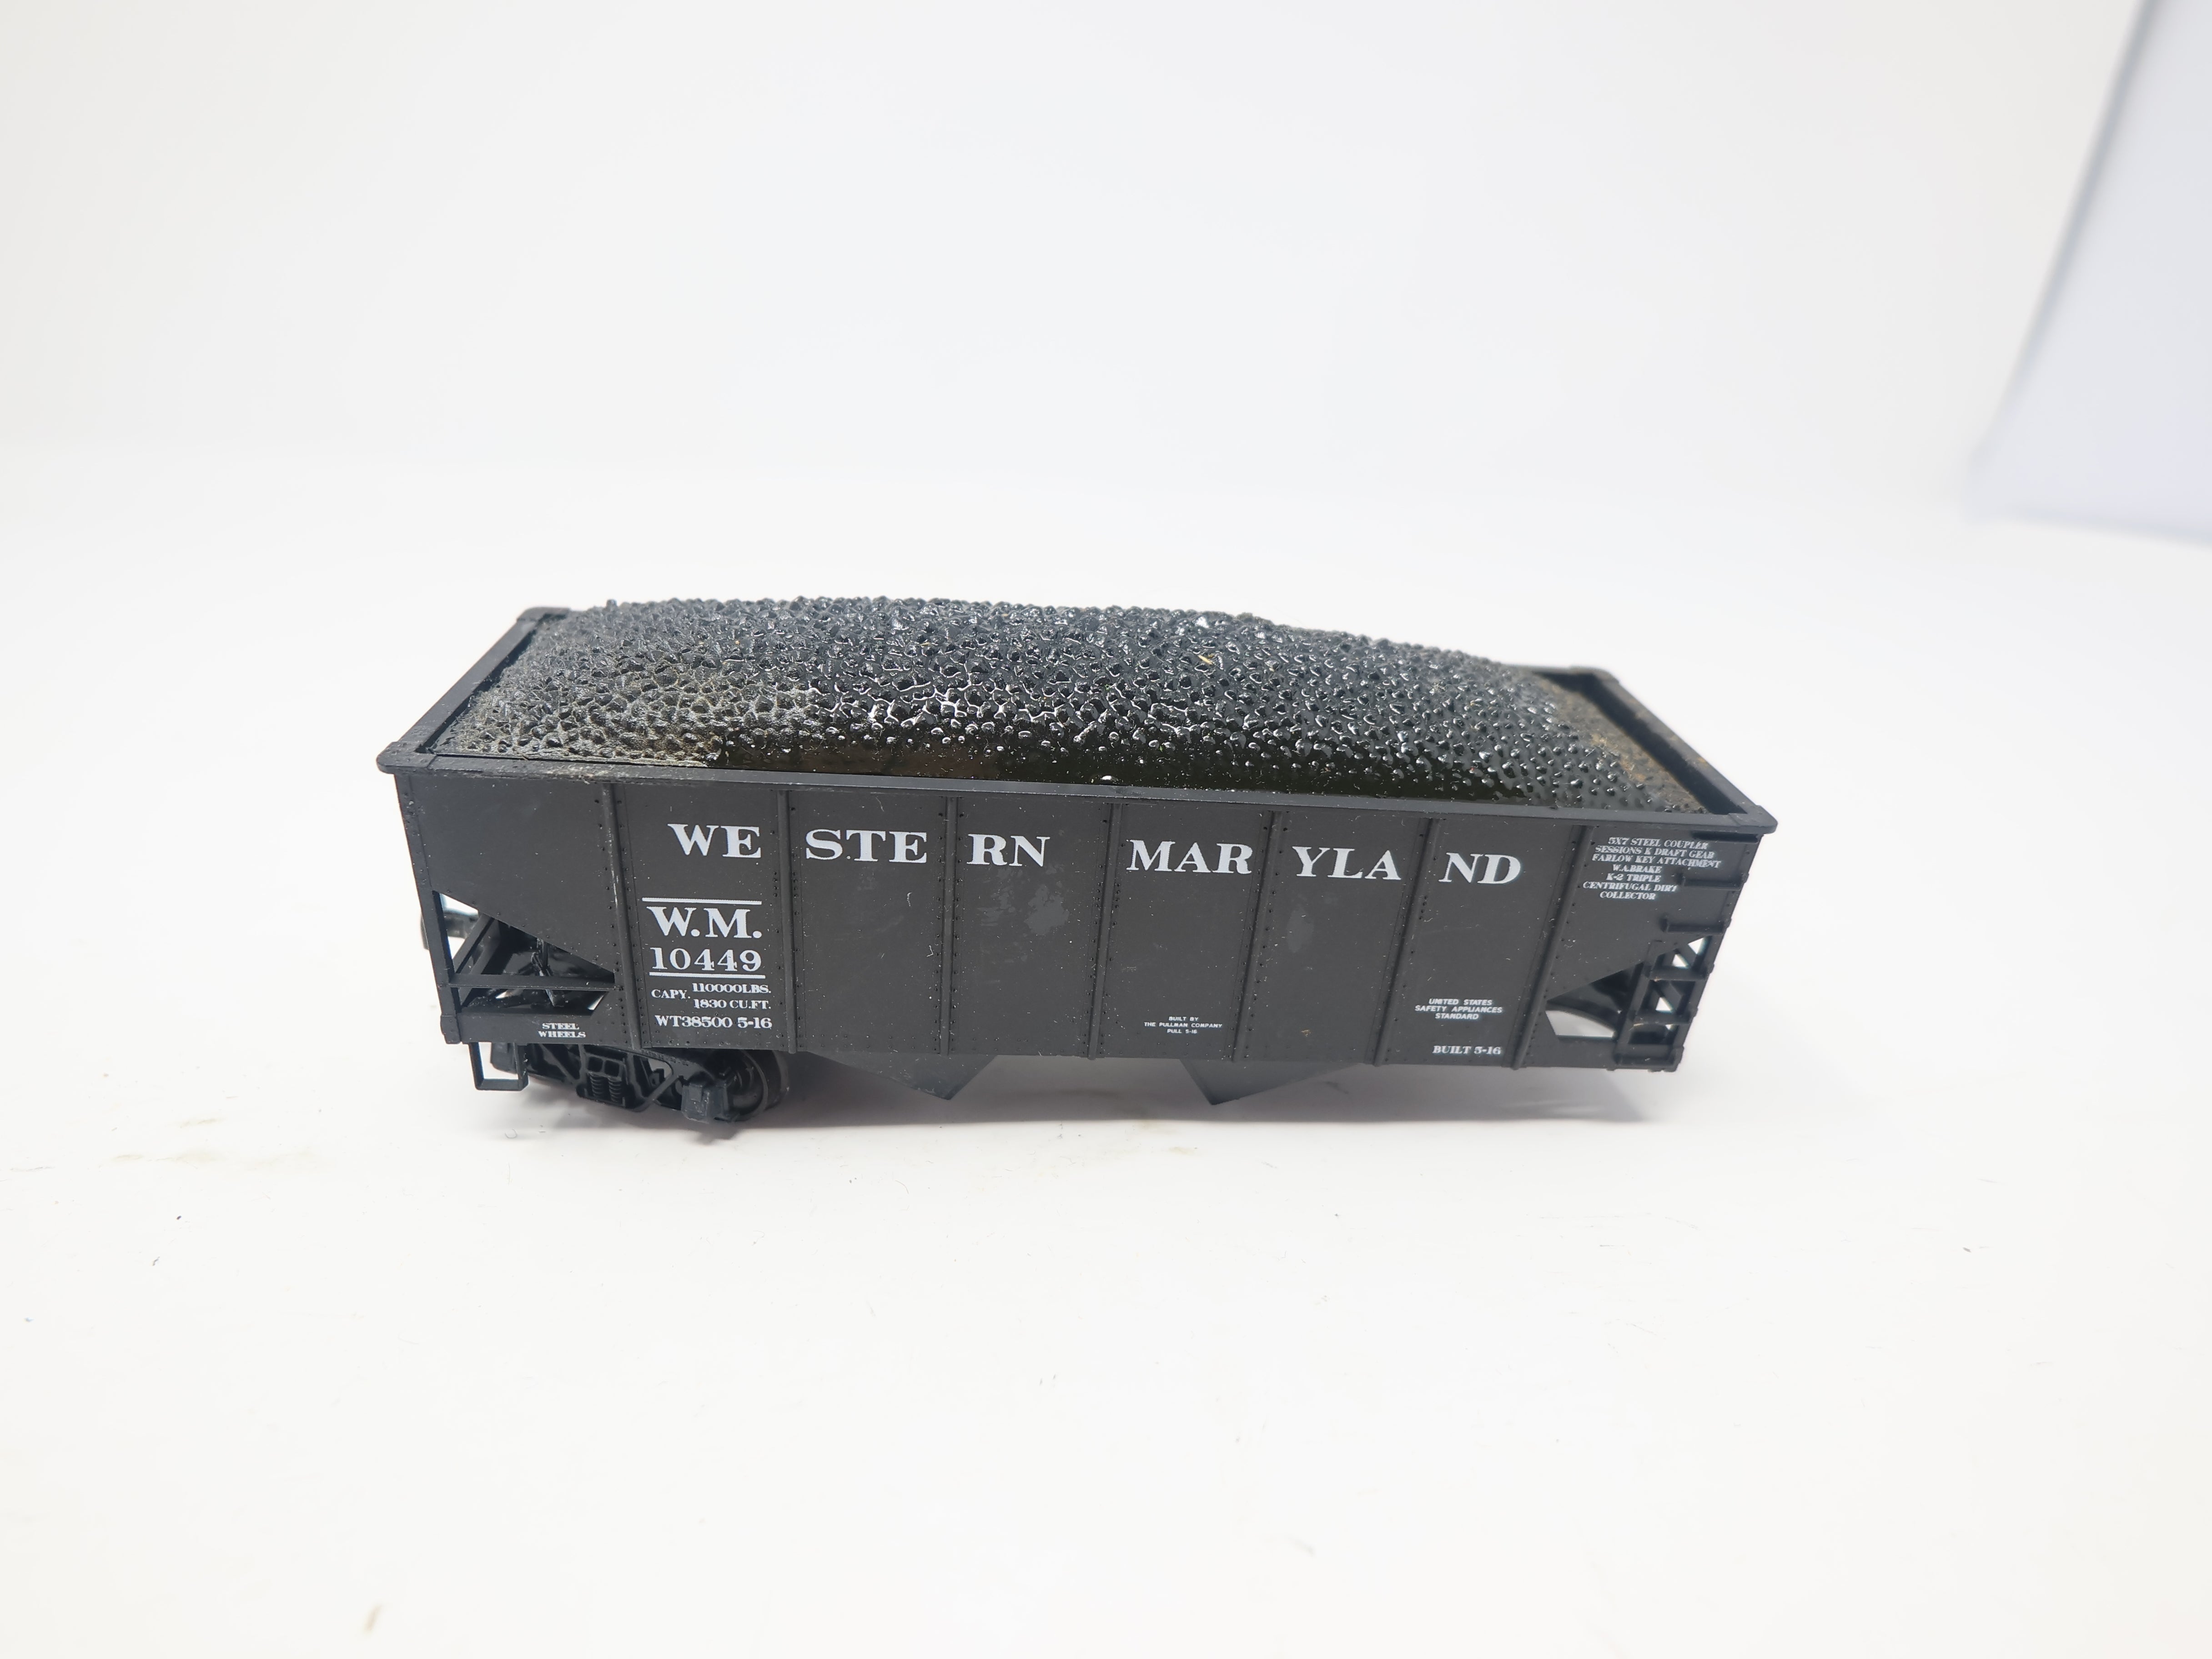 USED Accurail HO Scale, 2 Bay Open Hopper, Western Maryland WM #10449, Rough